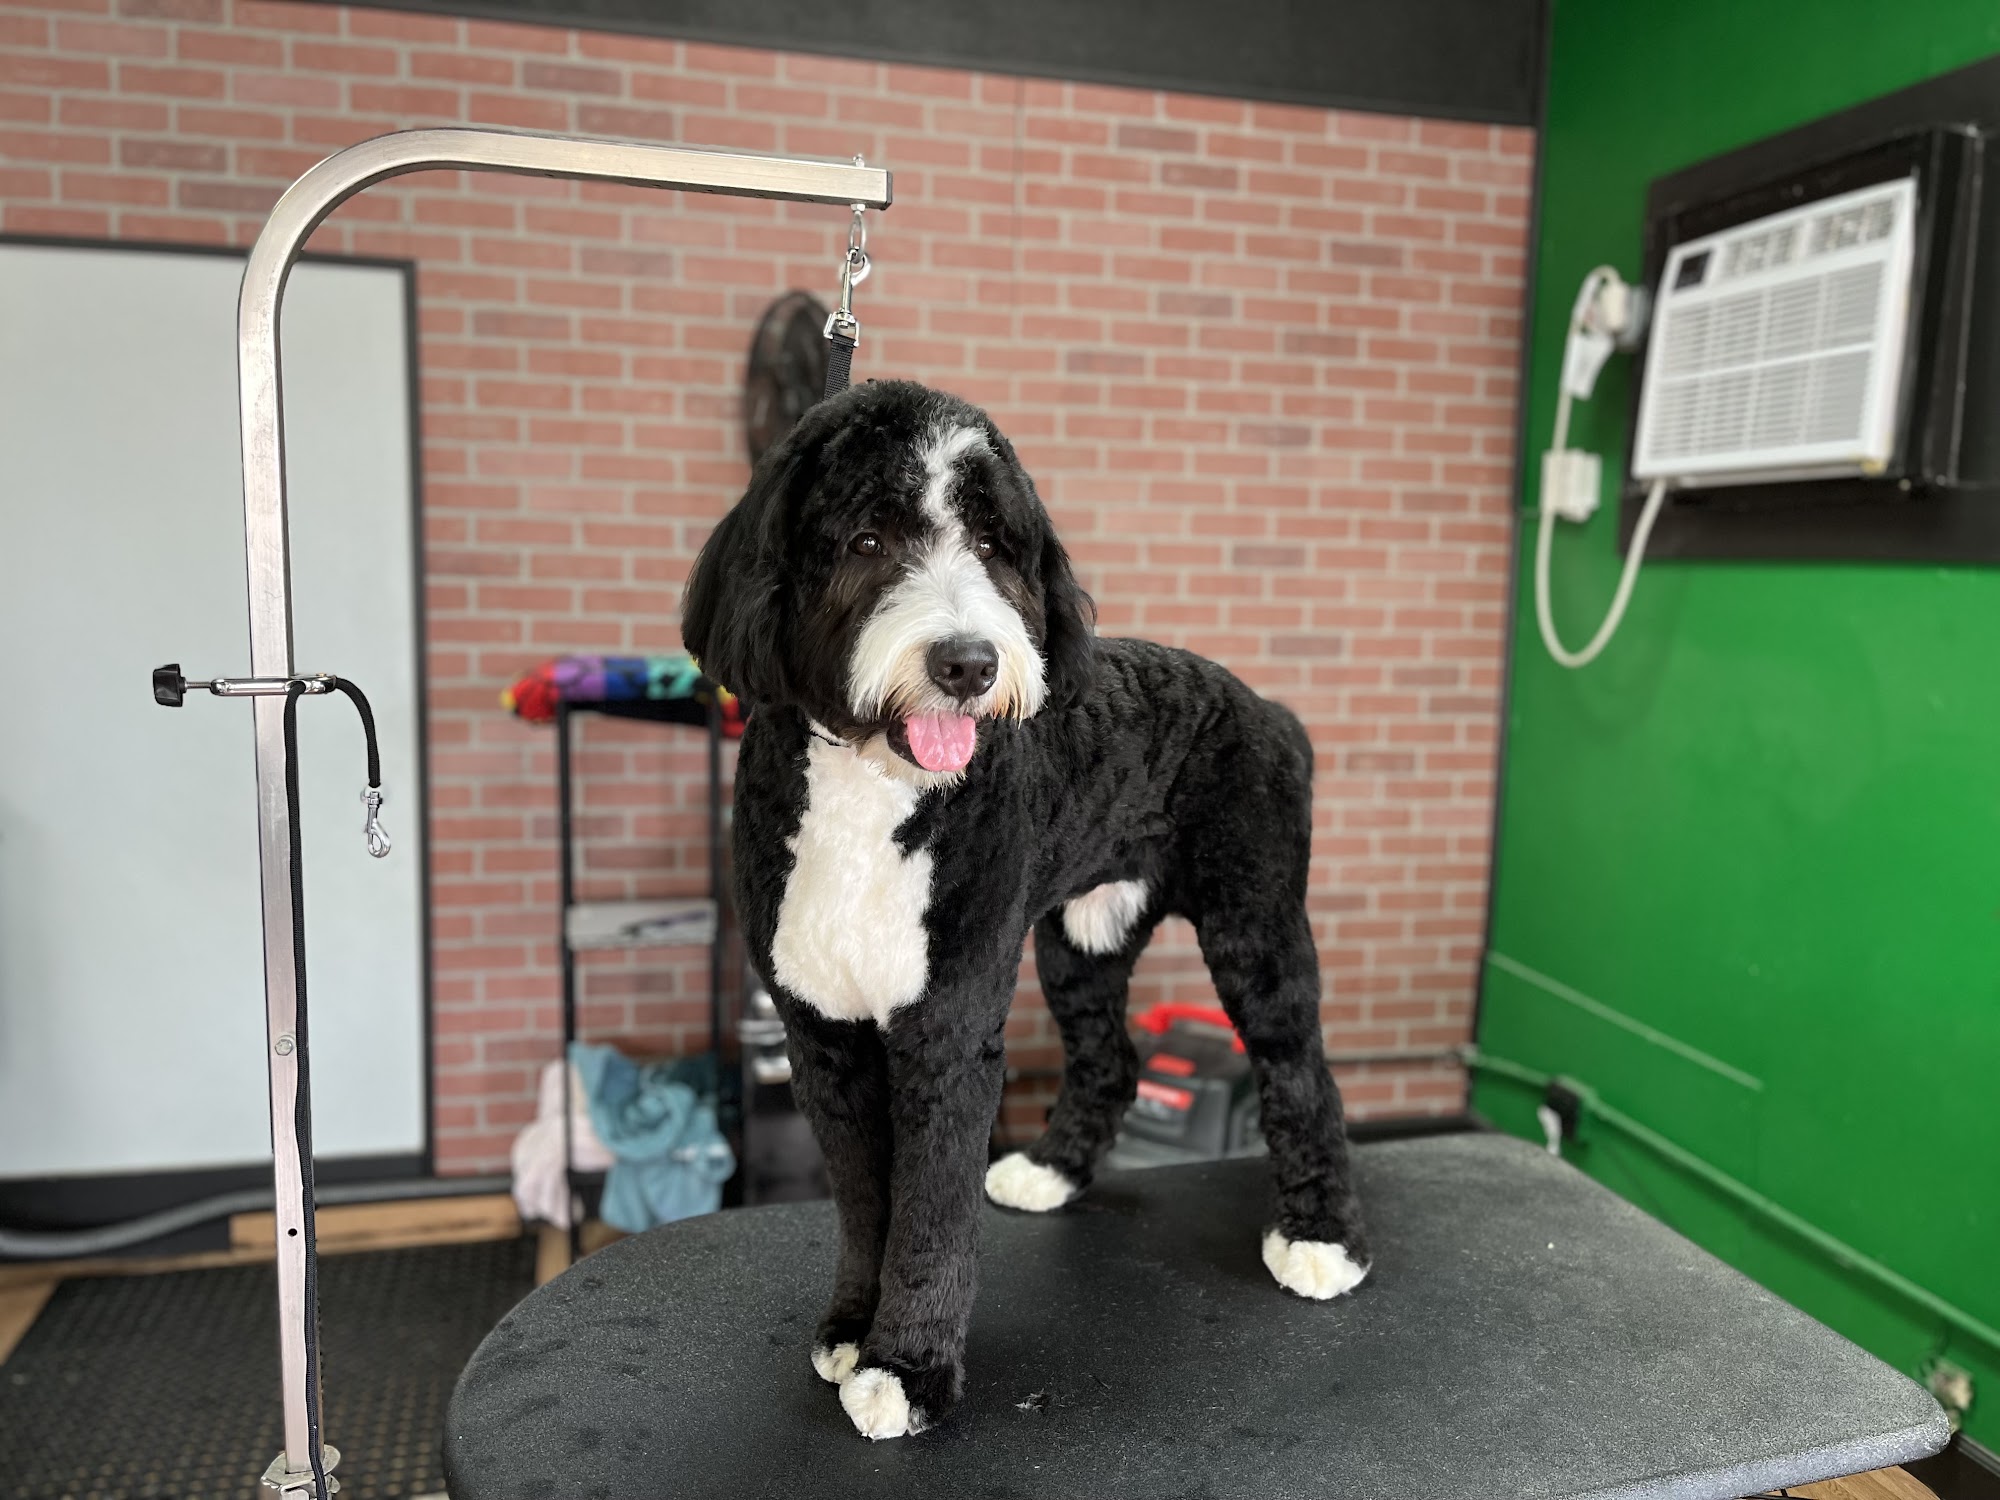 The Dog Room Grooming Boutique 200 N Black Horse Pike, Runnemede New Jersey 08078